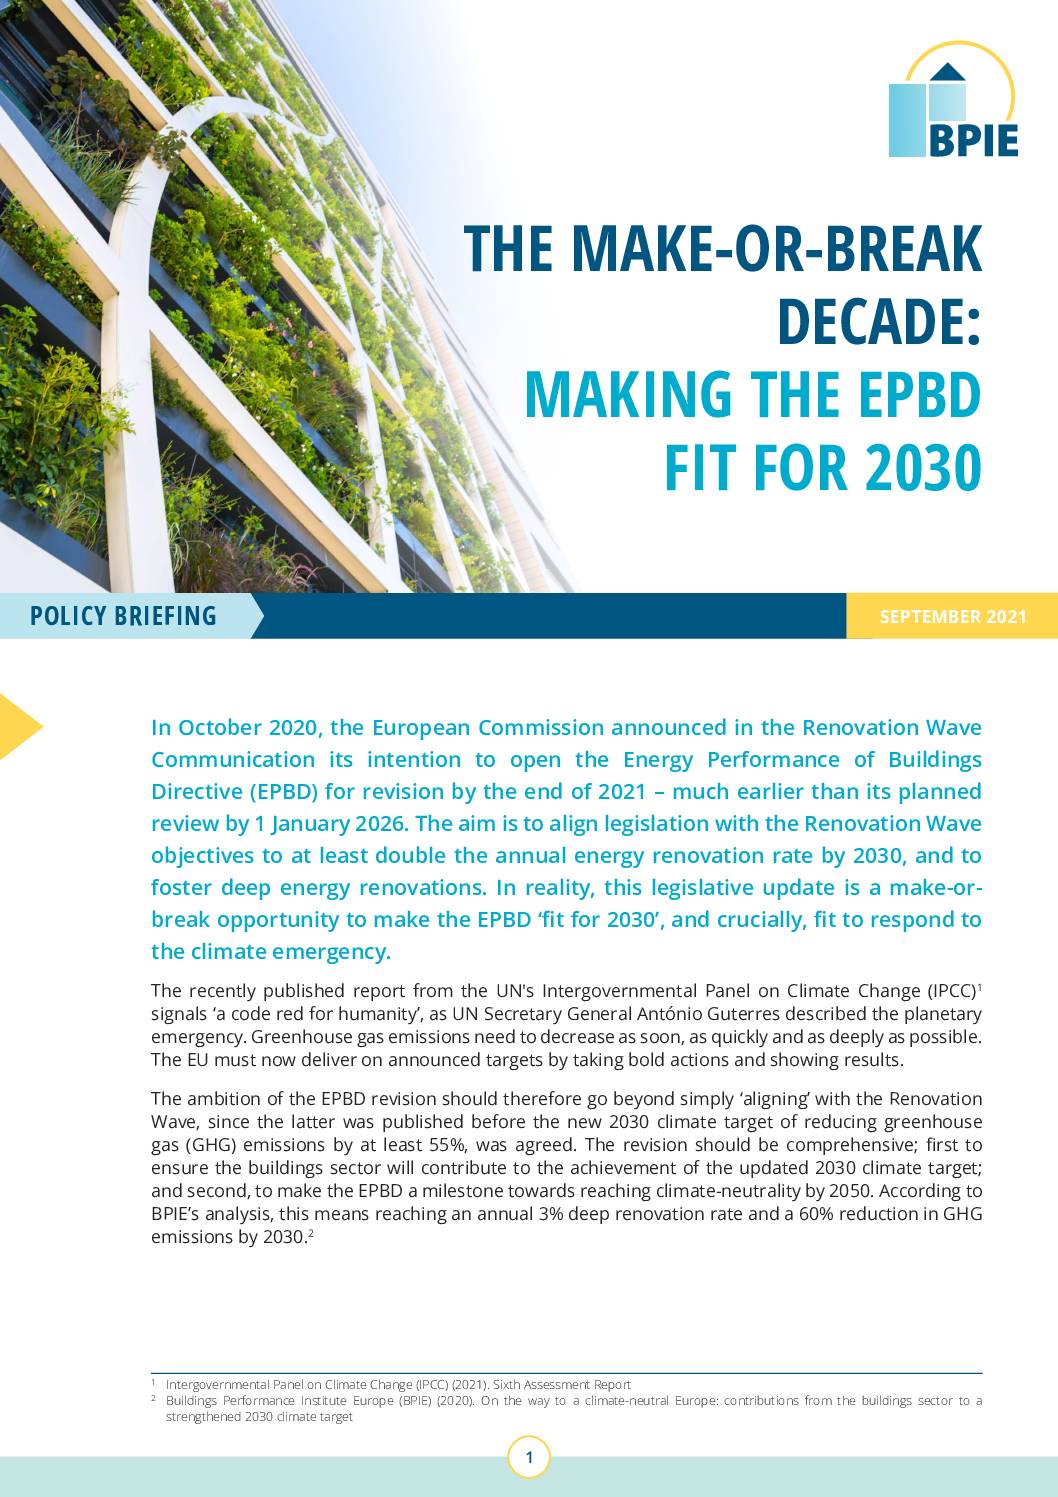 The Make-Or-Break Decade: Making the EPBD Fit for 2030